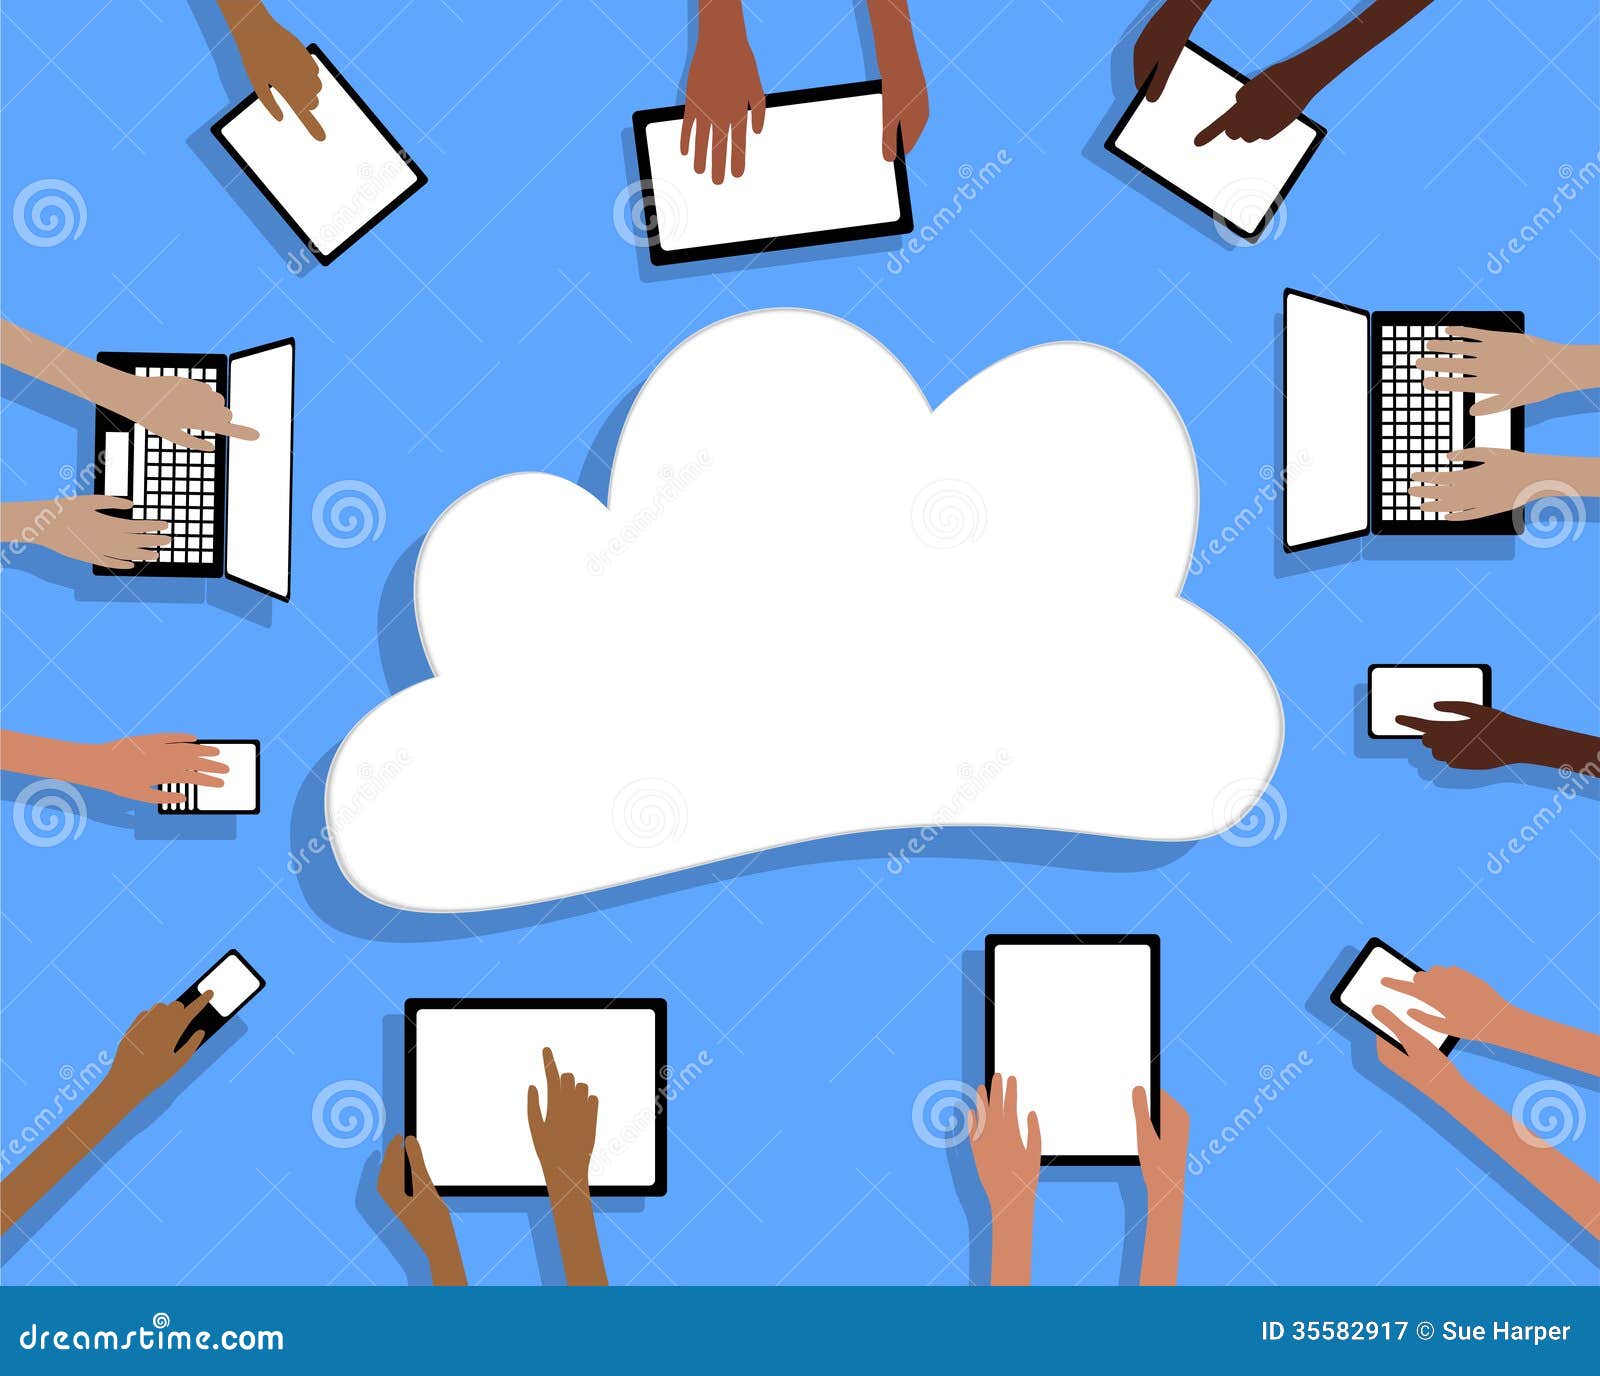 byod bring your own device tablets cloud and hands